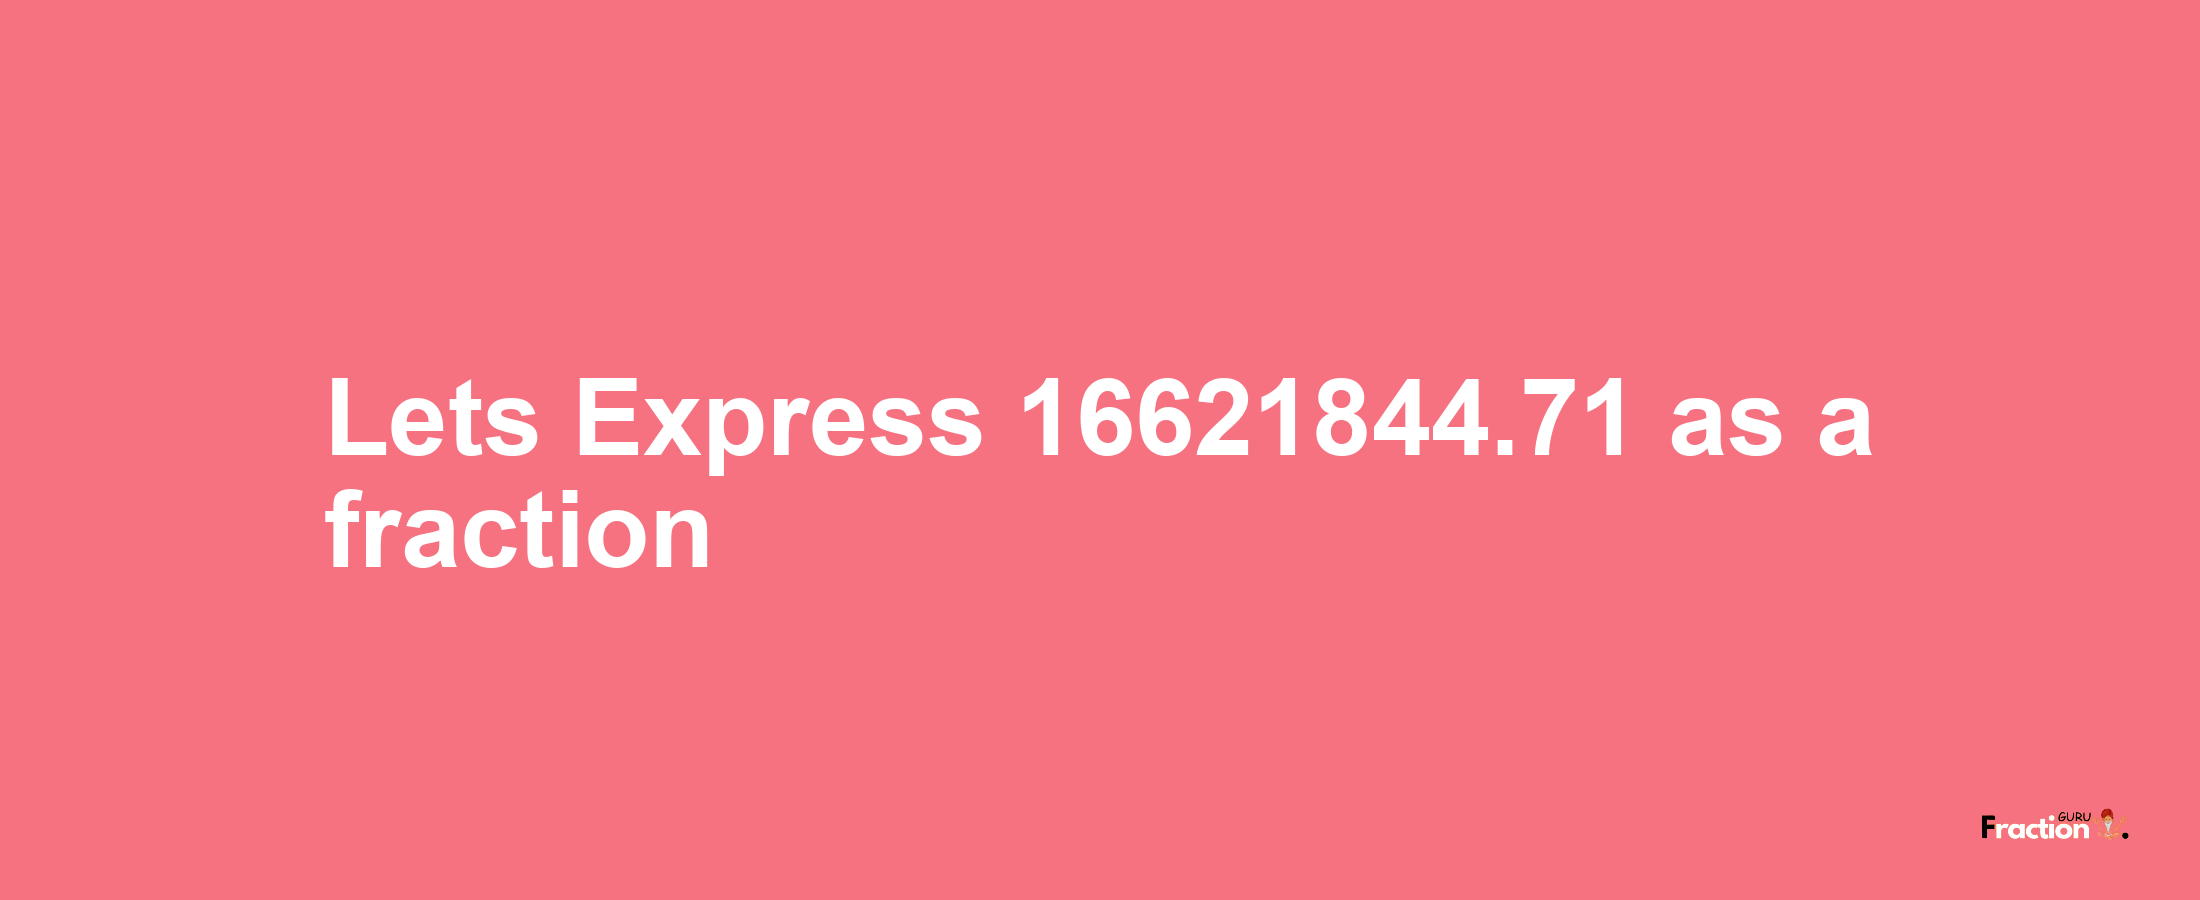 Lets Express 16621844.71 as afraction